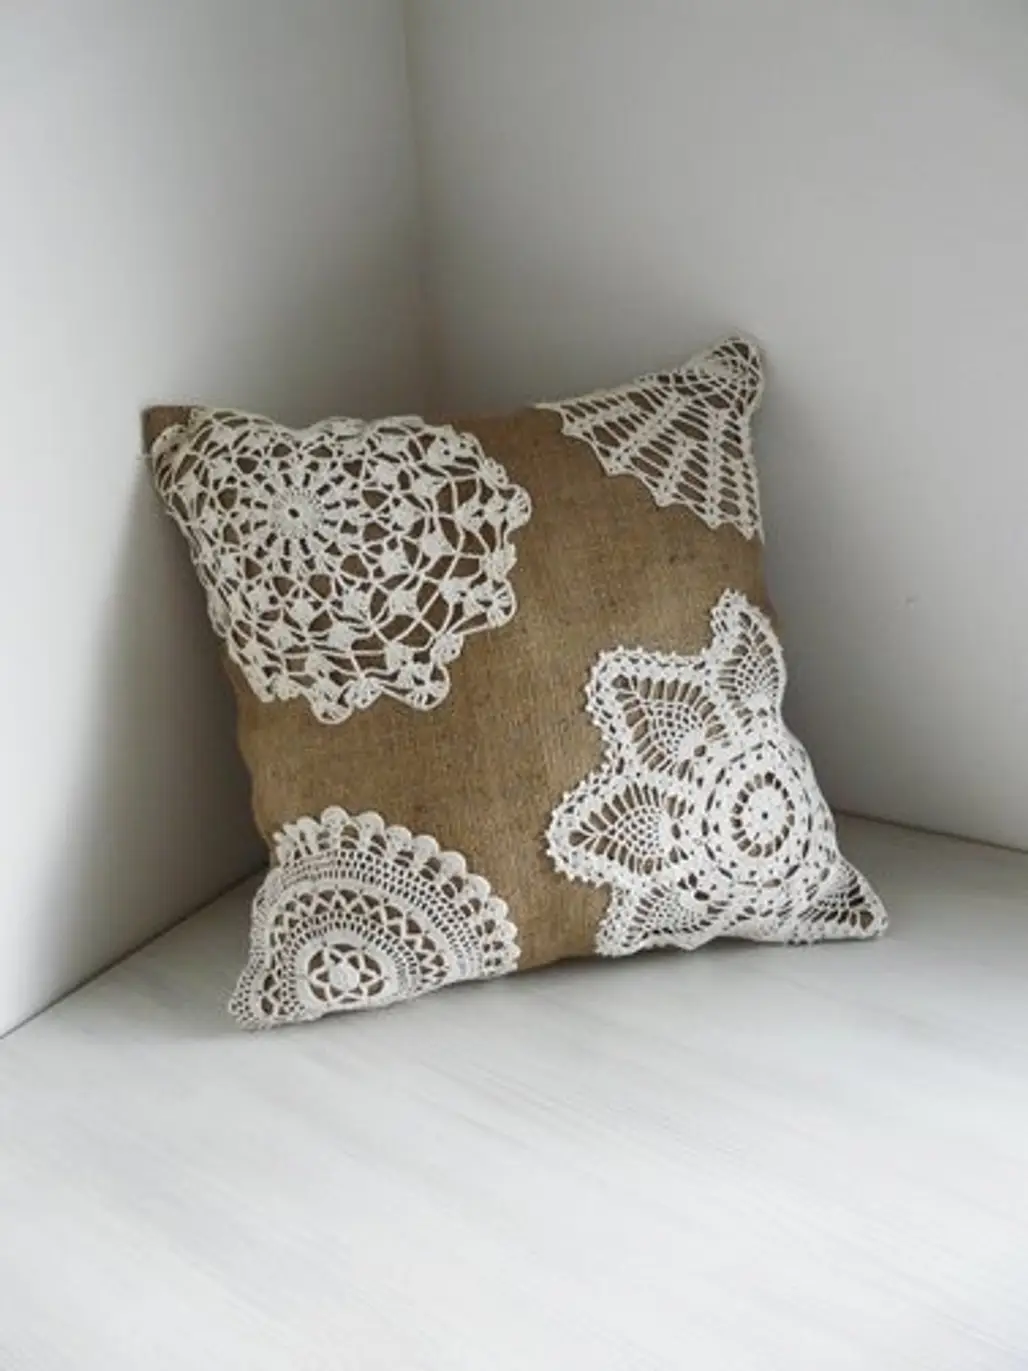 Sew a Shabby Chic Pillow